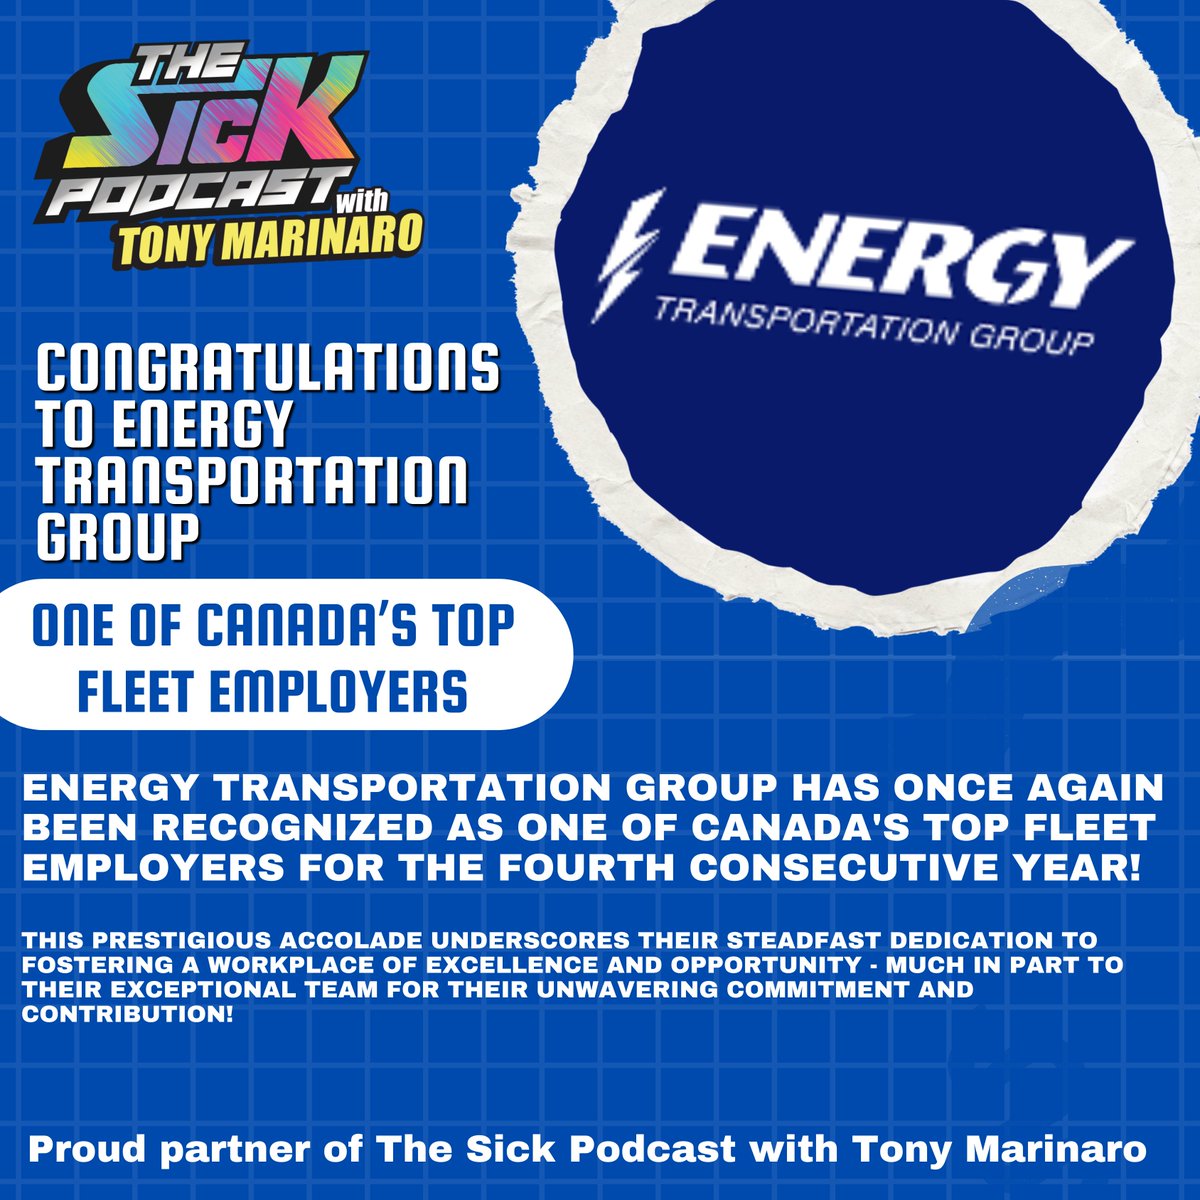 Congrats to our proud partner for this SICK accomplishment! #thesickpodcast @TonyMarinaro